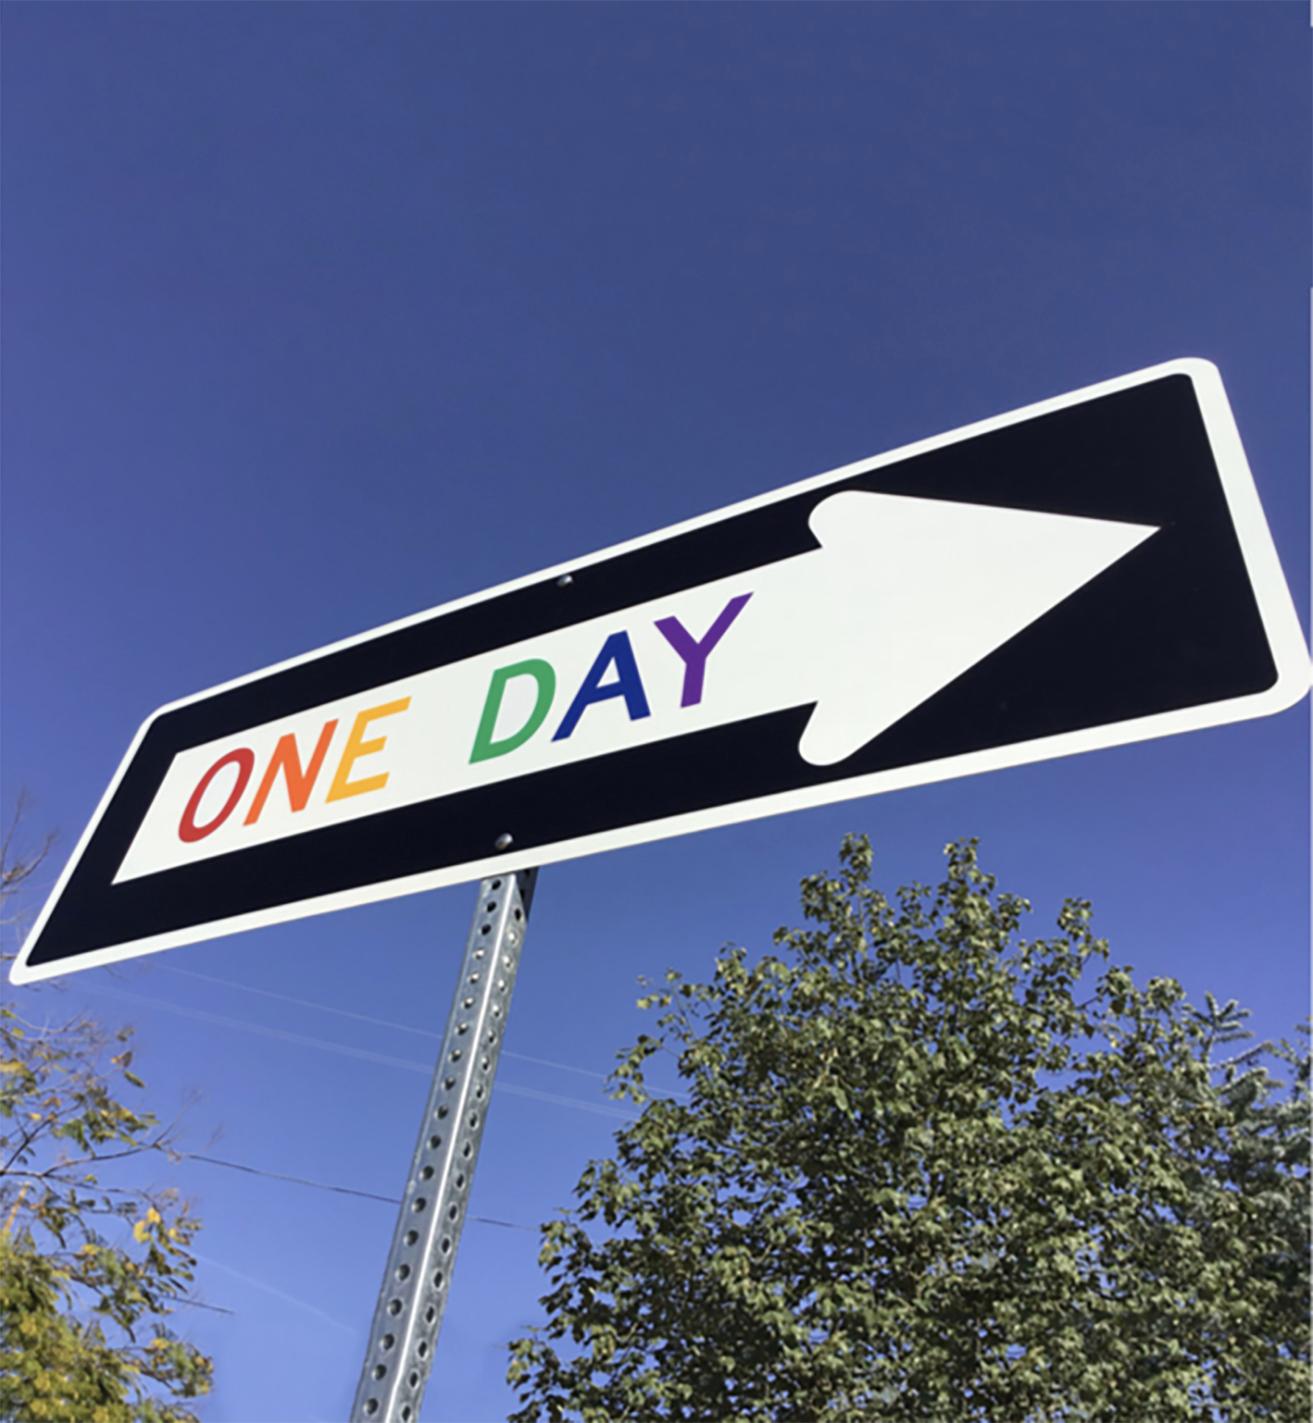 "One Day Rainbow" - Contemporary Street Sign Sculpture